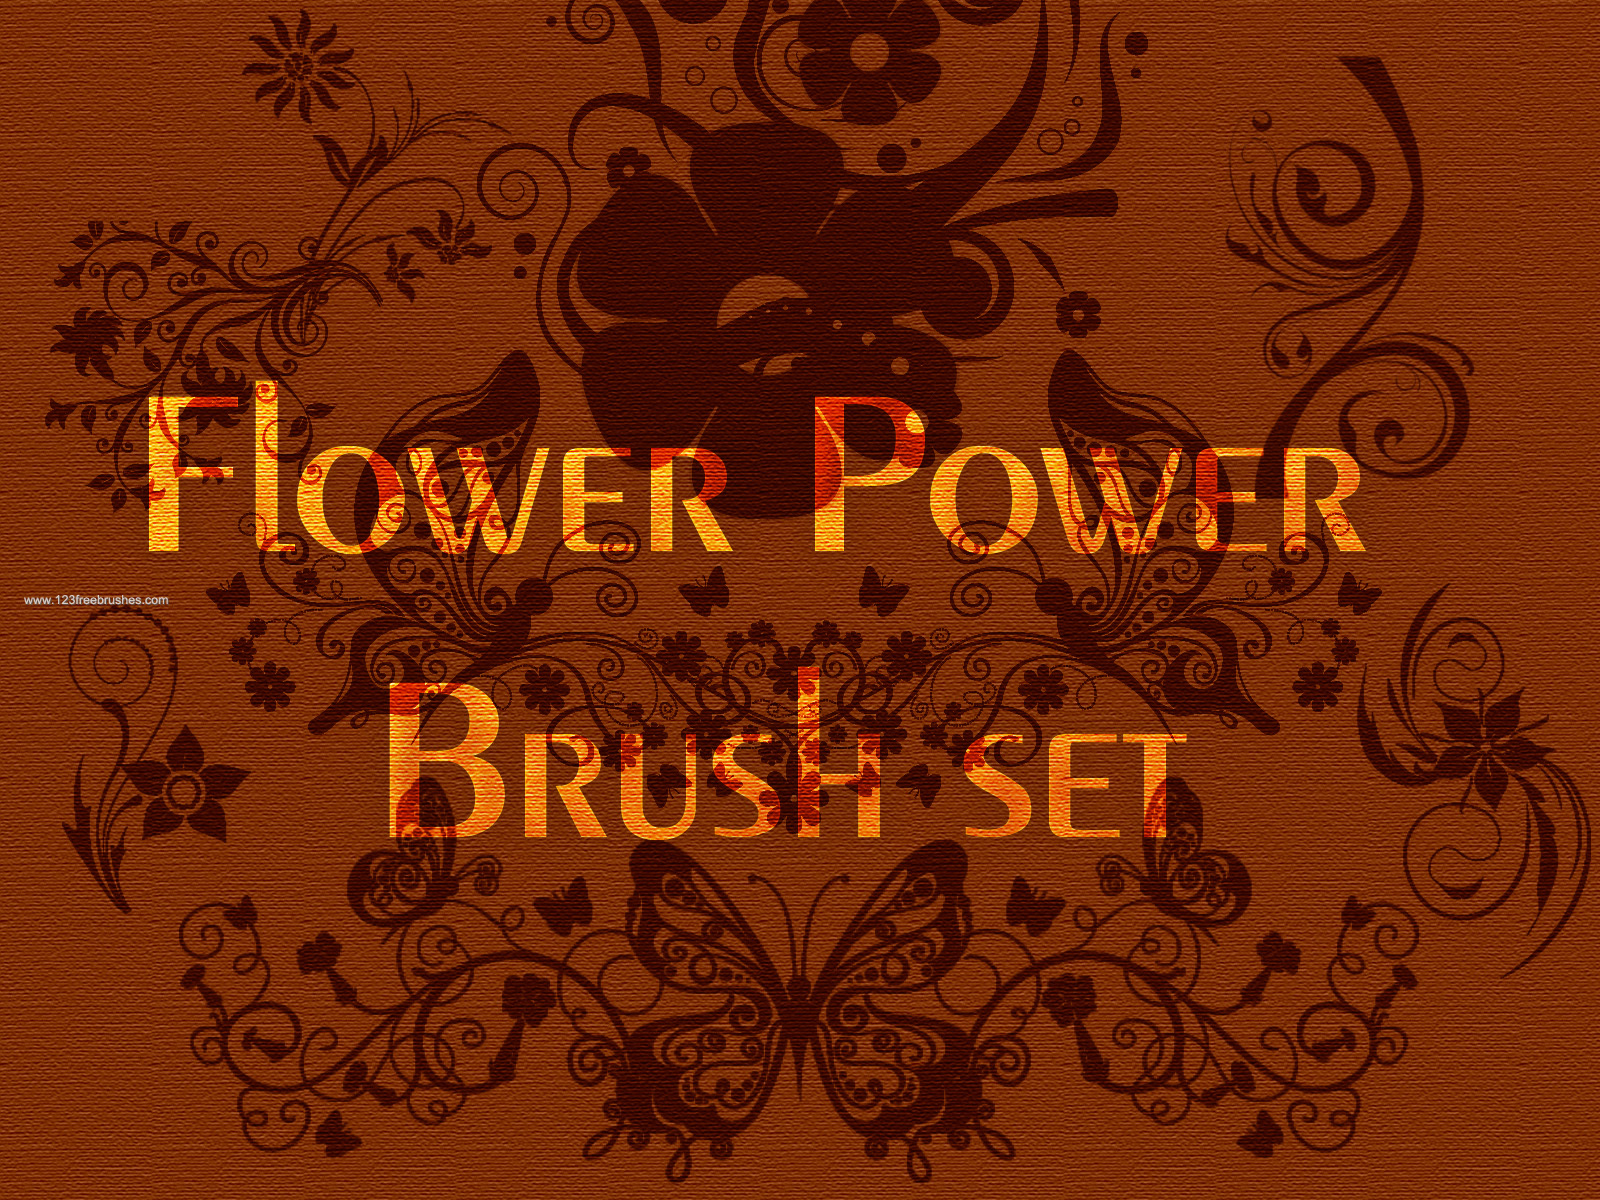 Floral Brushes Ai